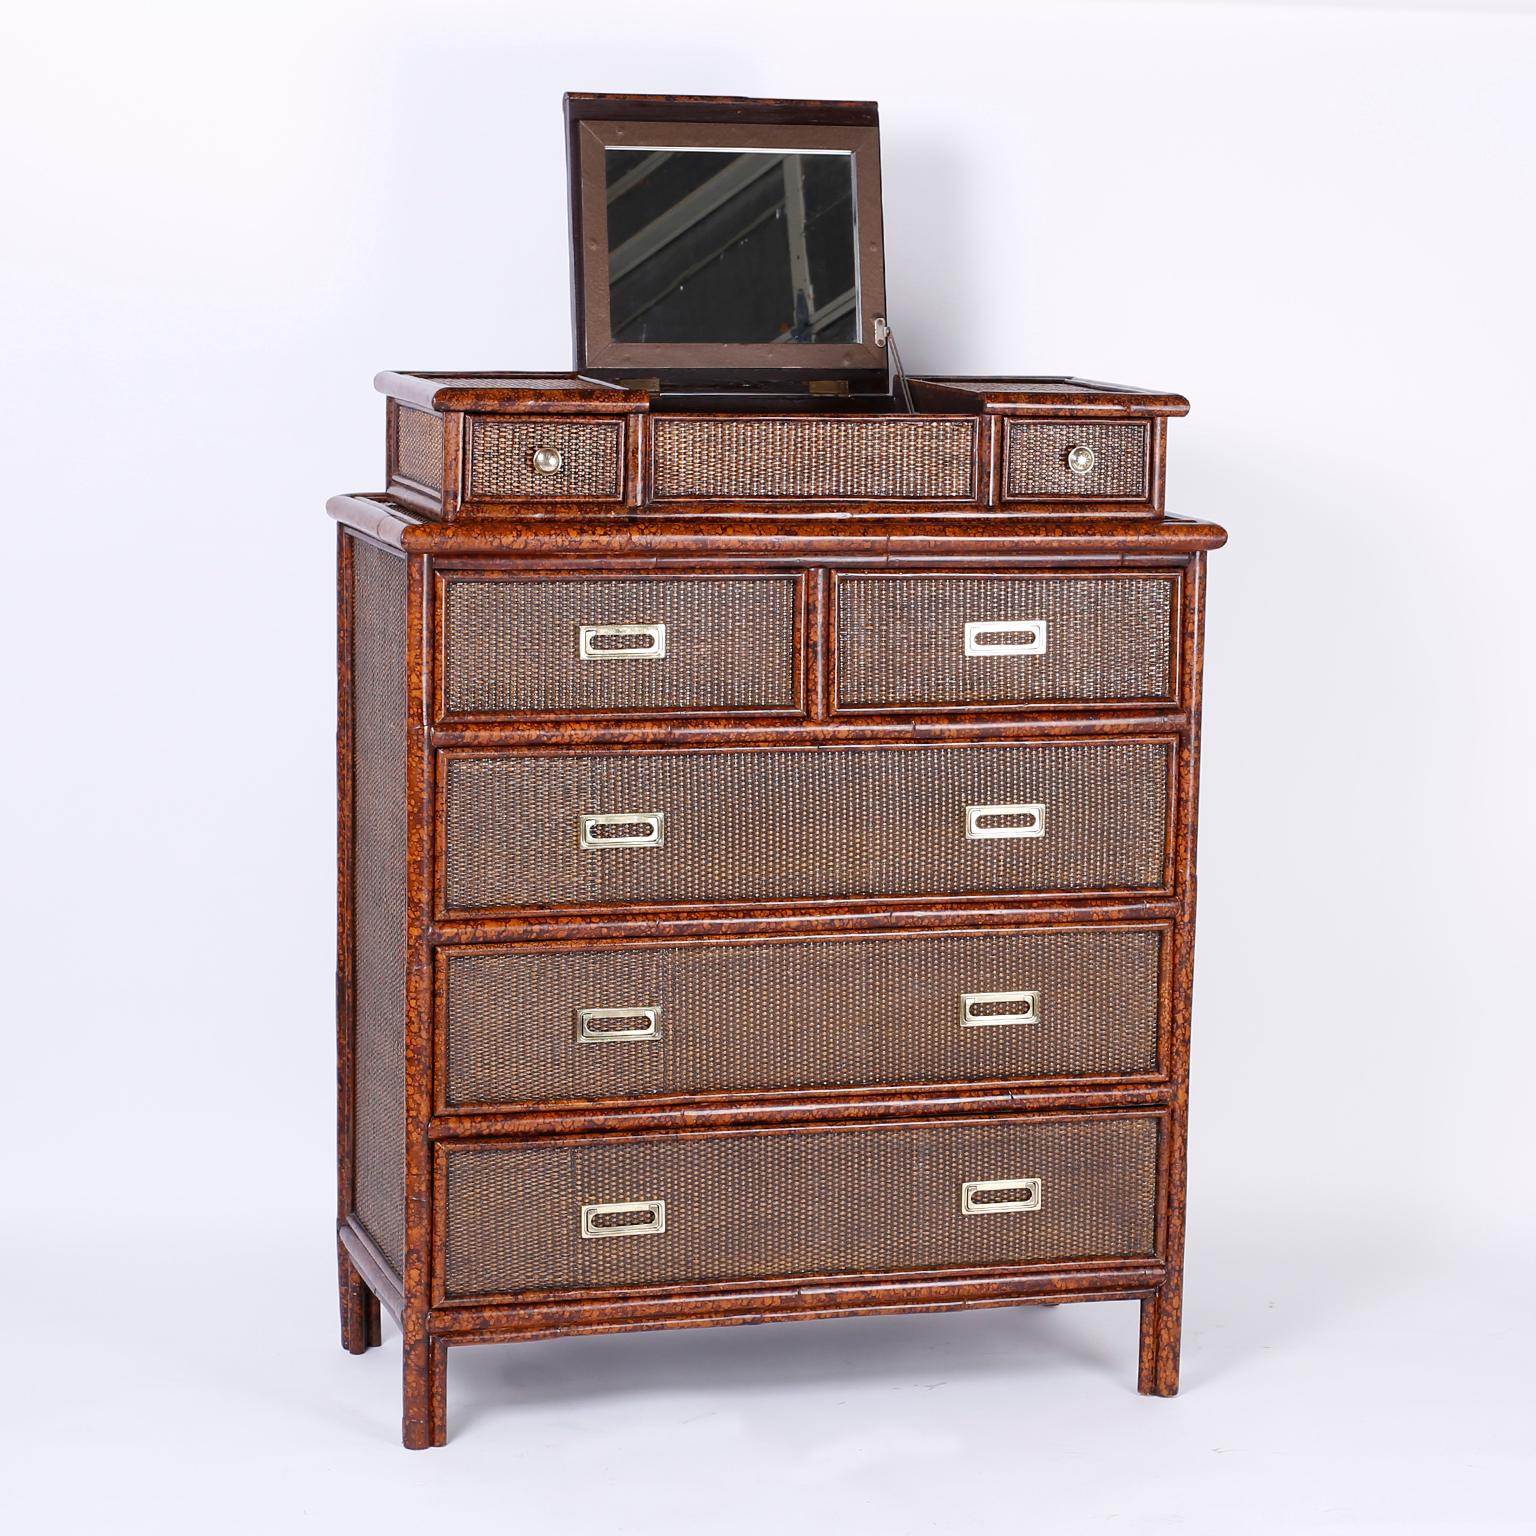 Midcentury British Colonial style chest of drawers with an unusual removable vanity top and fold out mirror. Having an intriguing faux tortoise frame over a grass cloth case and campaign style hardware.

Measures: Height without vanity 43